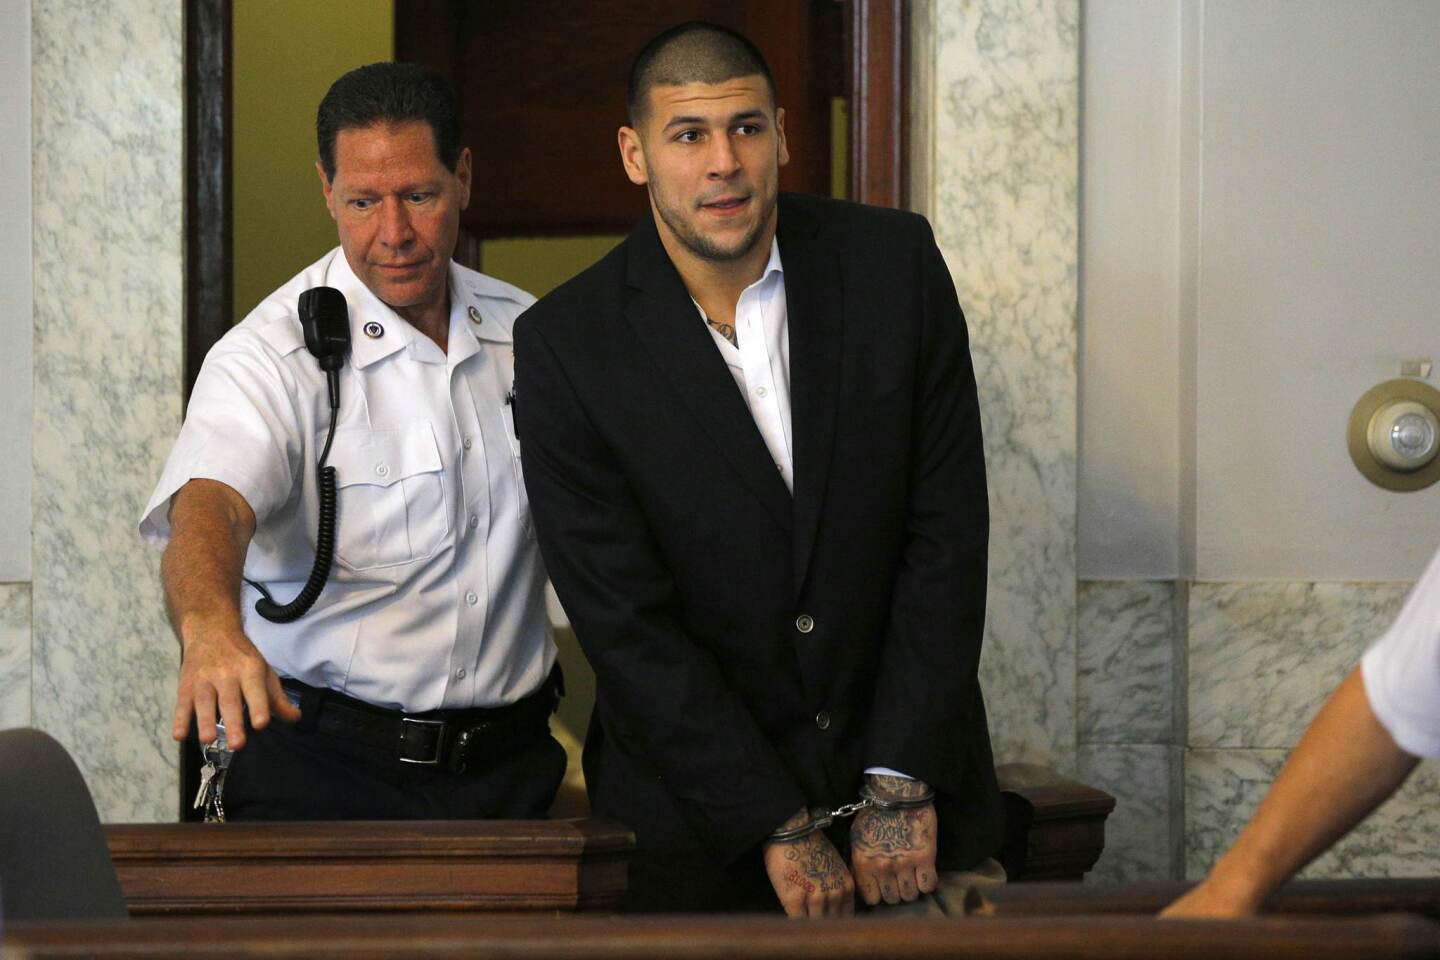 Aaron Hernandez, former player for the NFL's New England Patriots football team, enters the courtroom